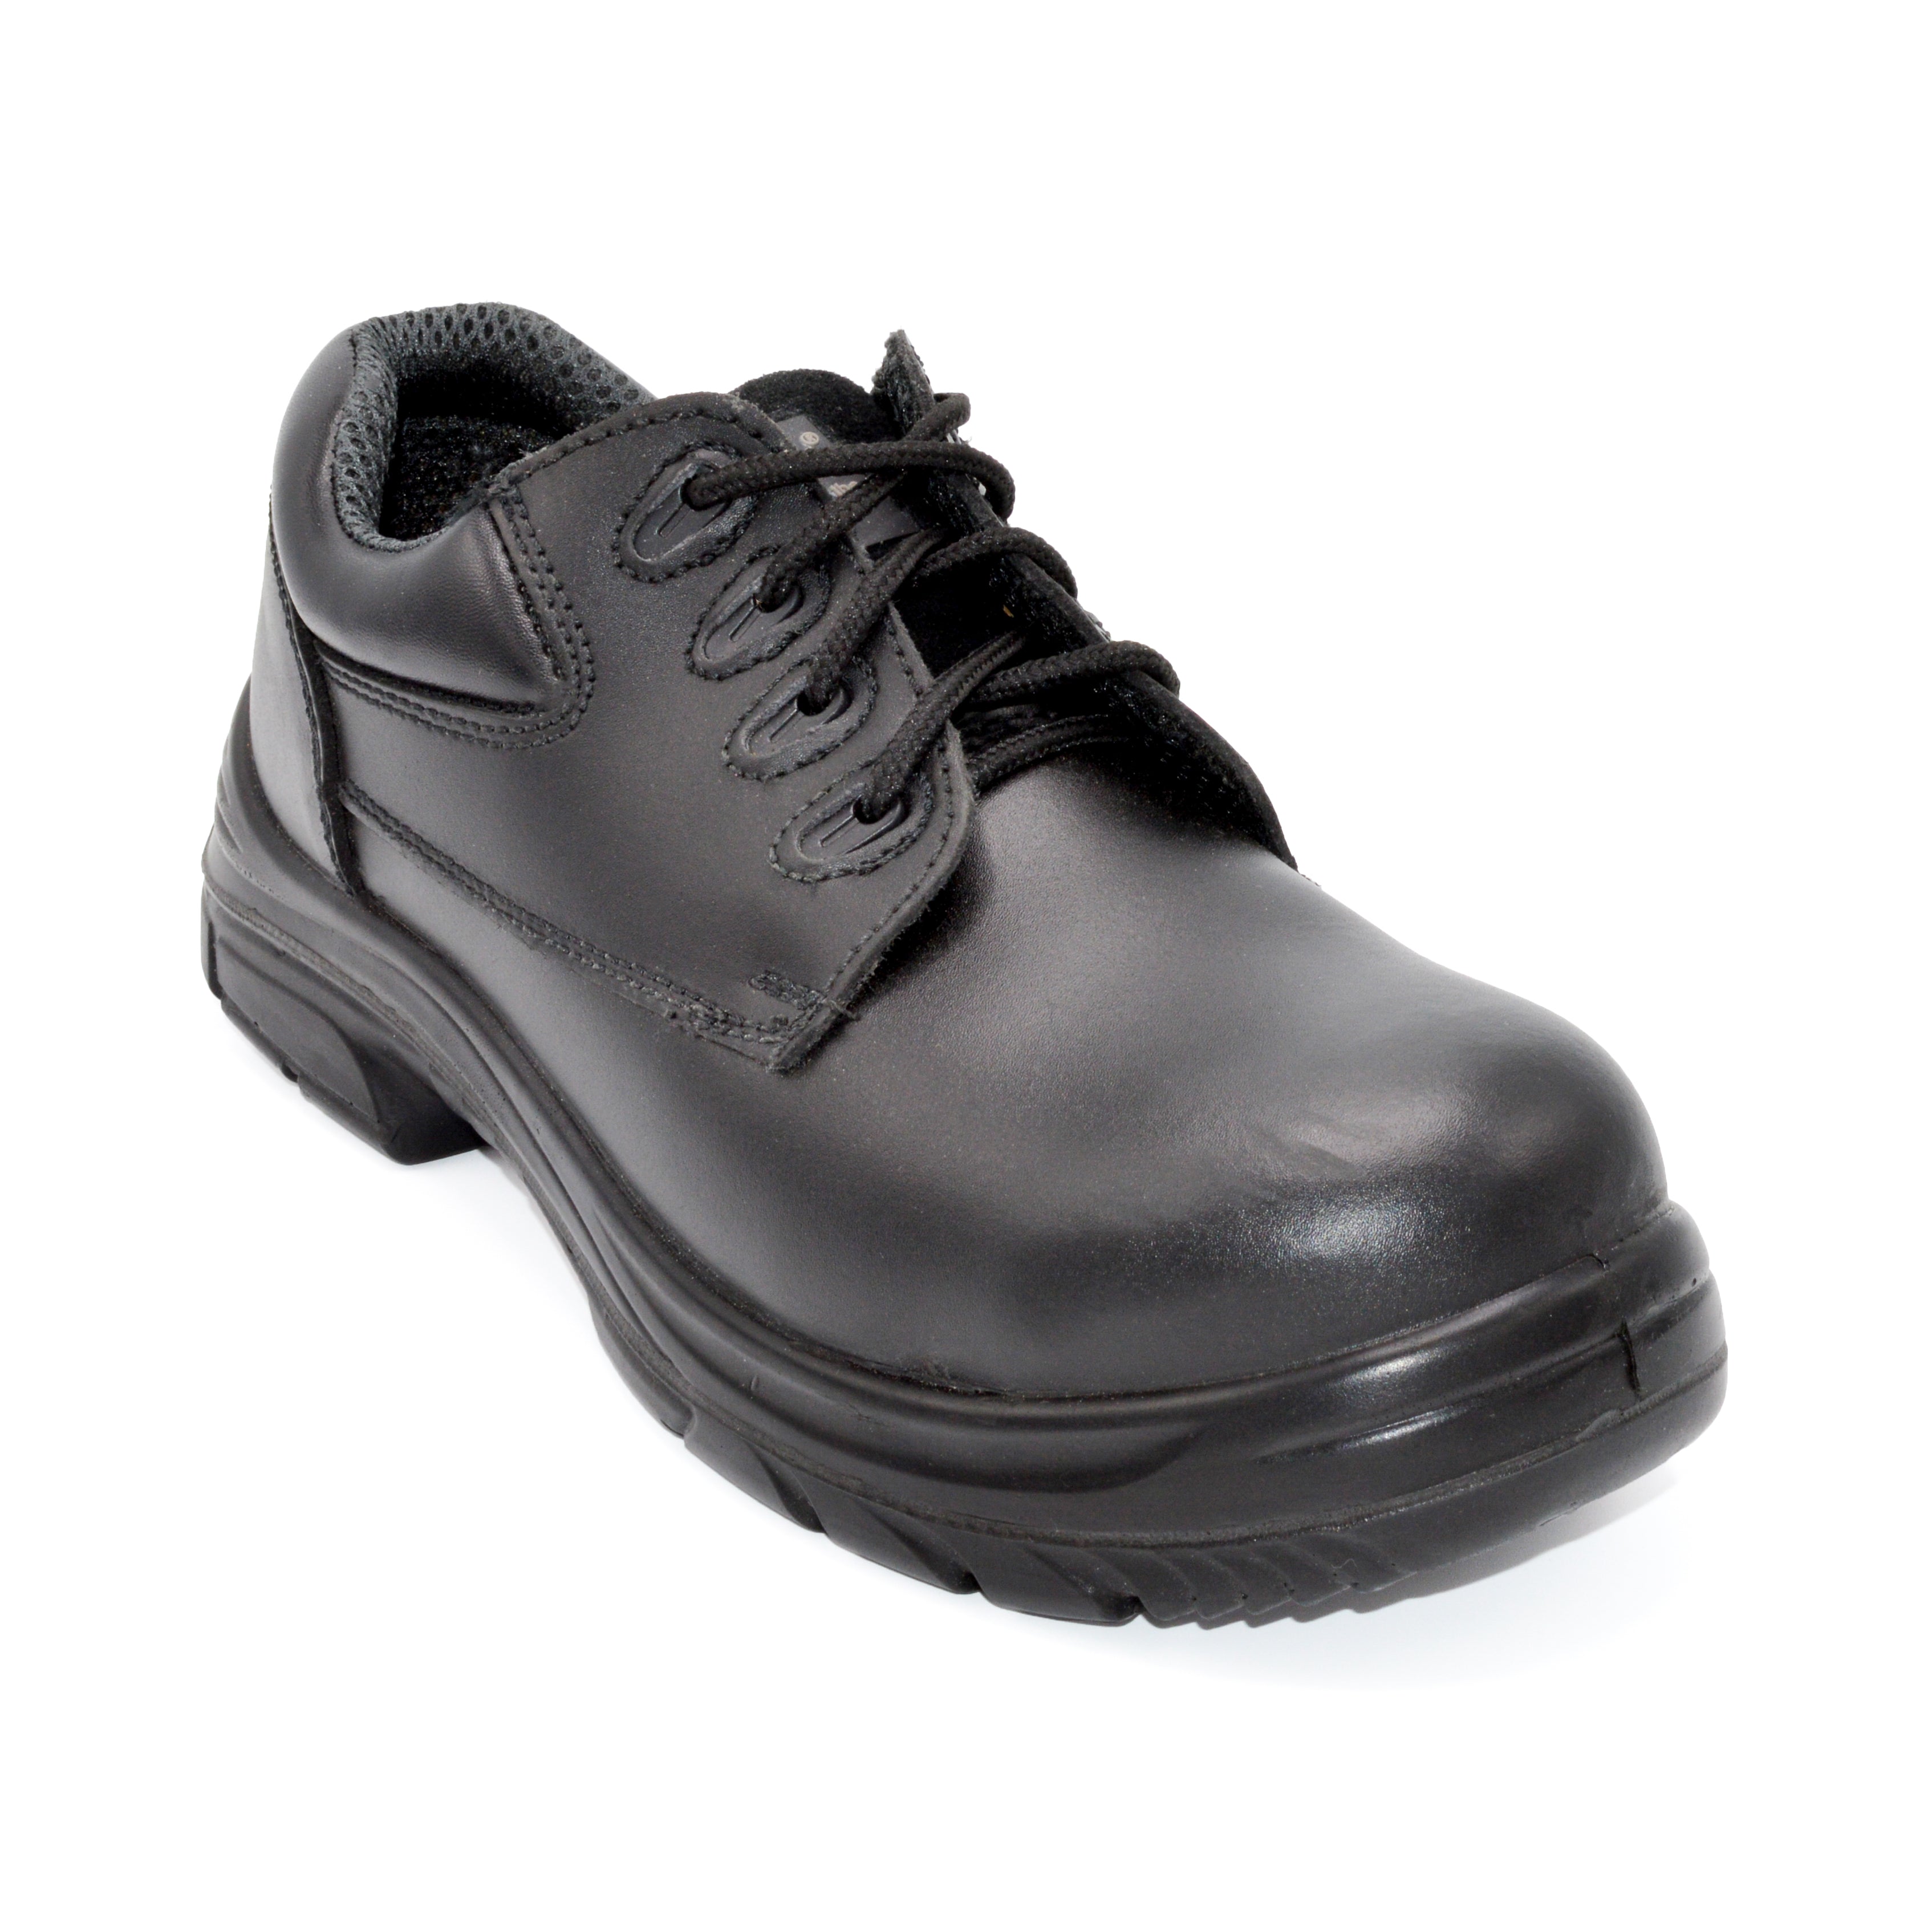 Black Lace-up Safety Shoes For Bunions